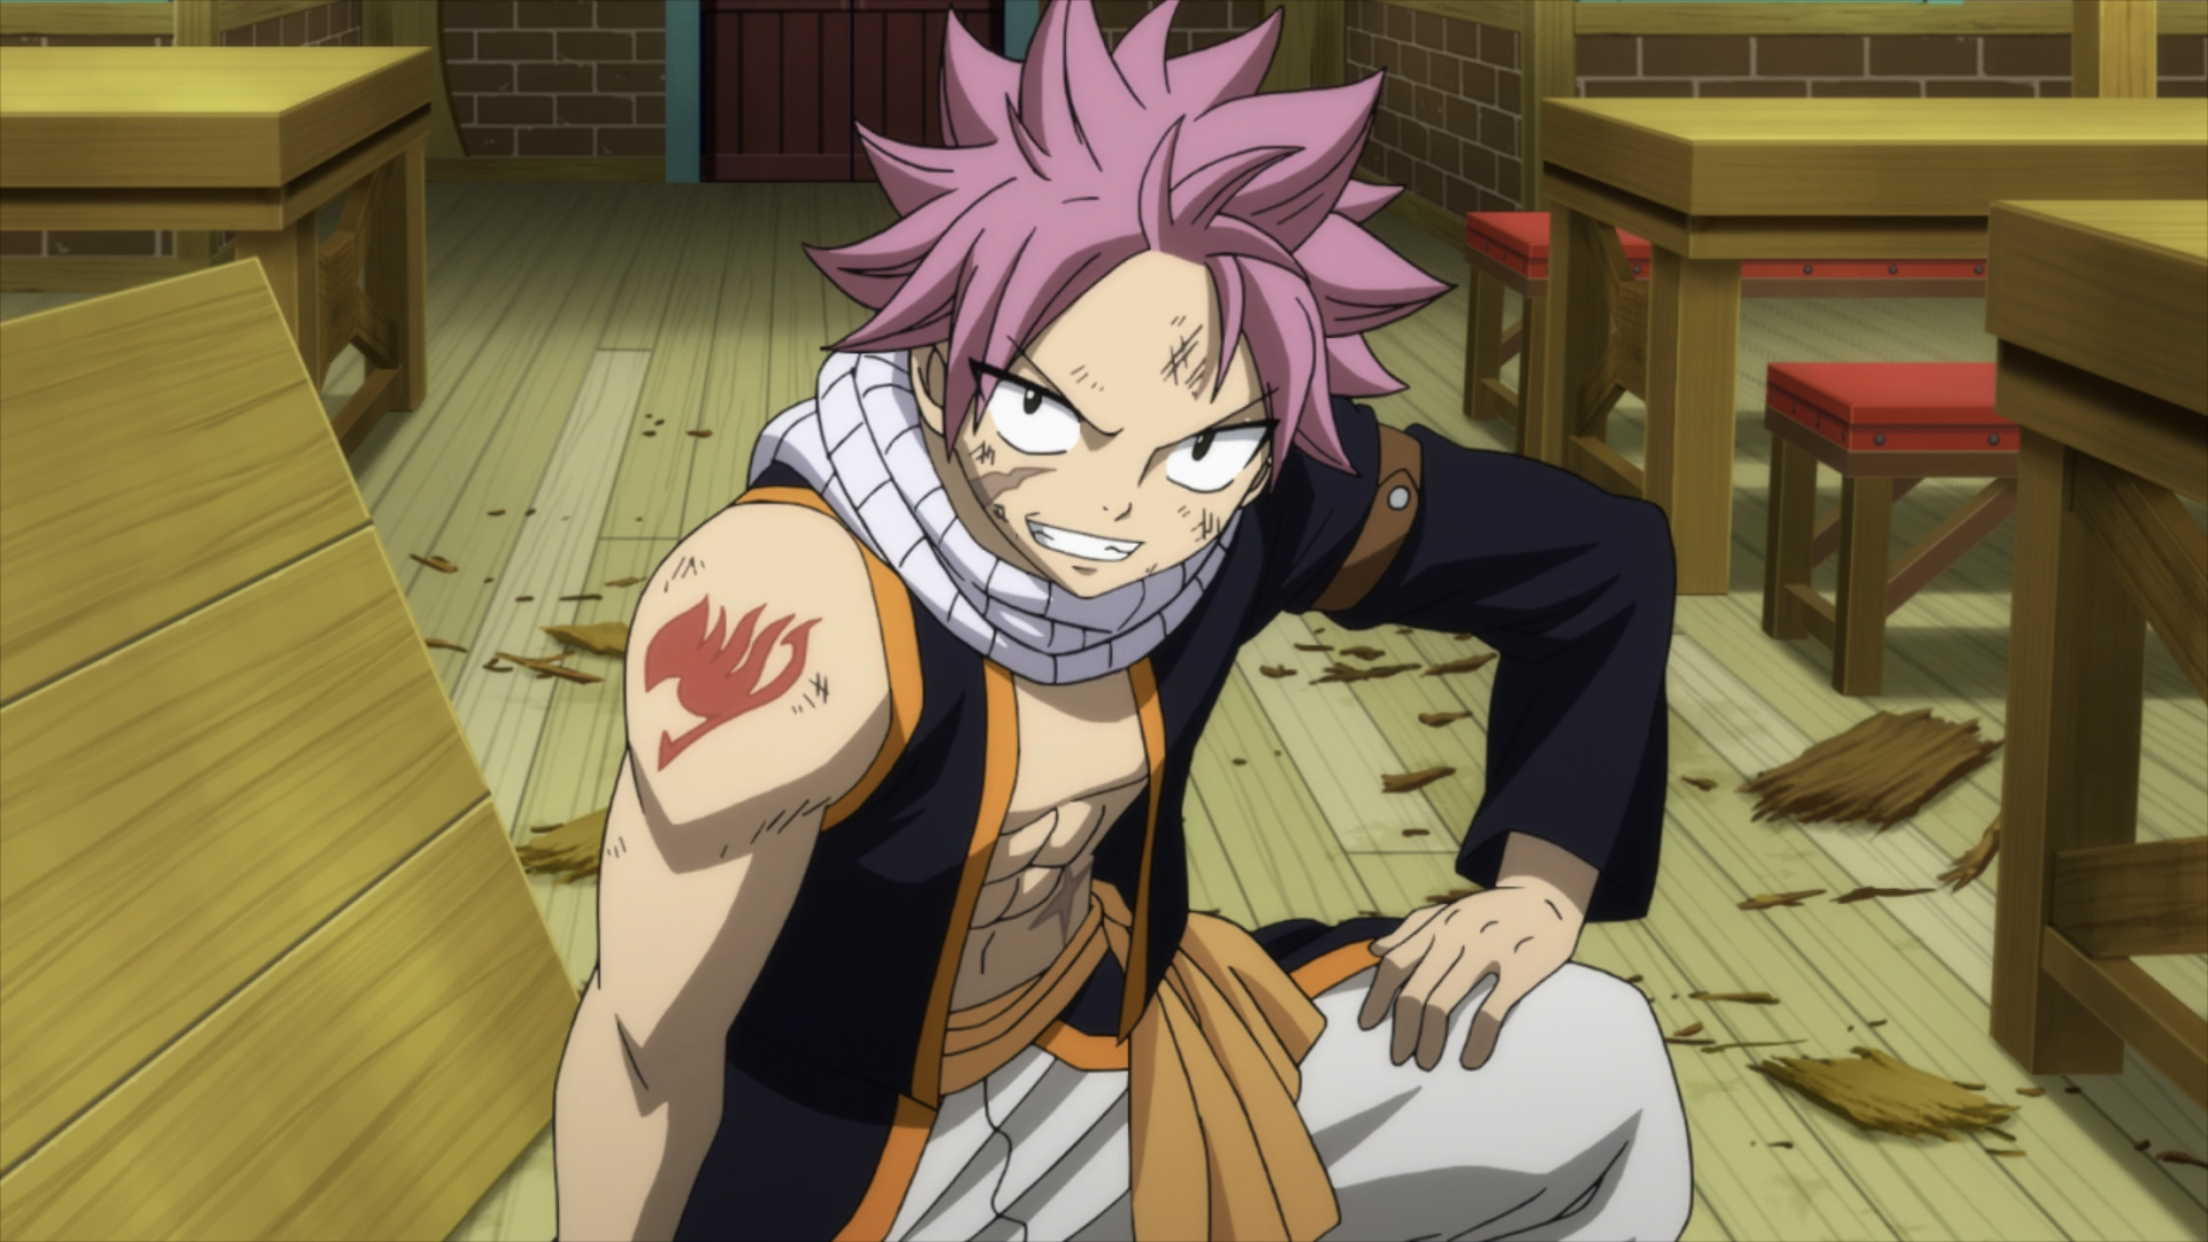 chris moehling recommends Season 3 Fairy Tail